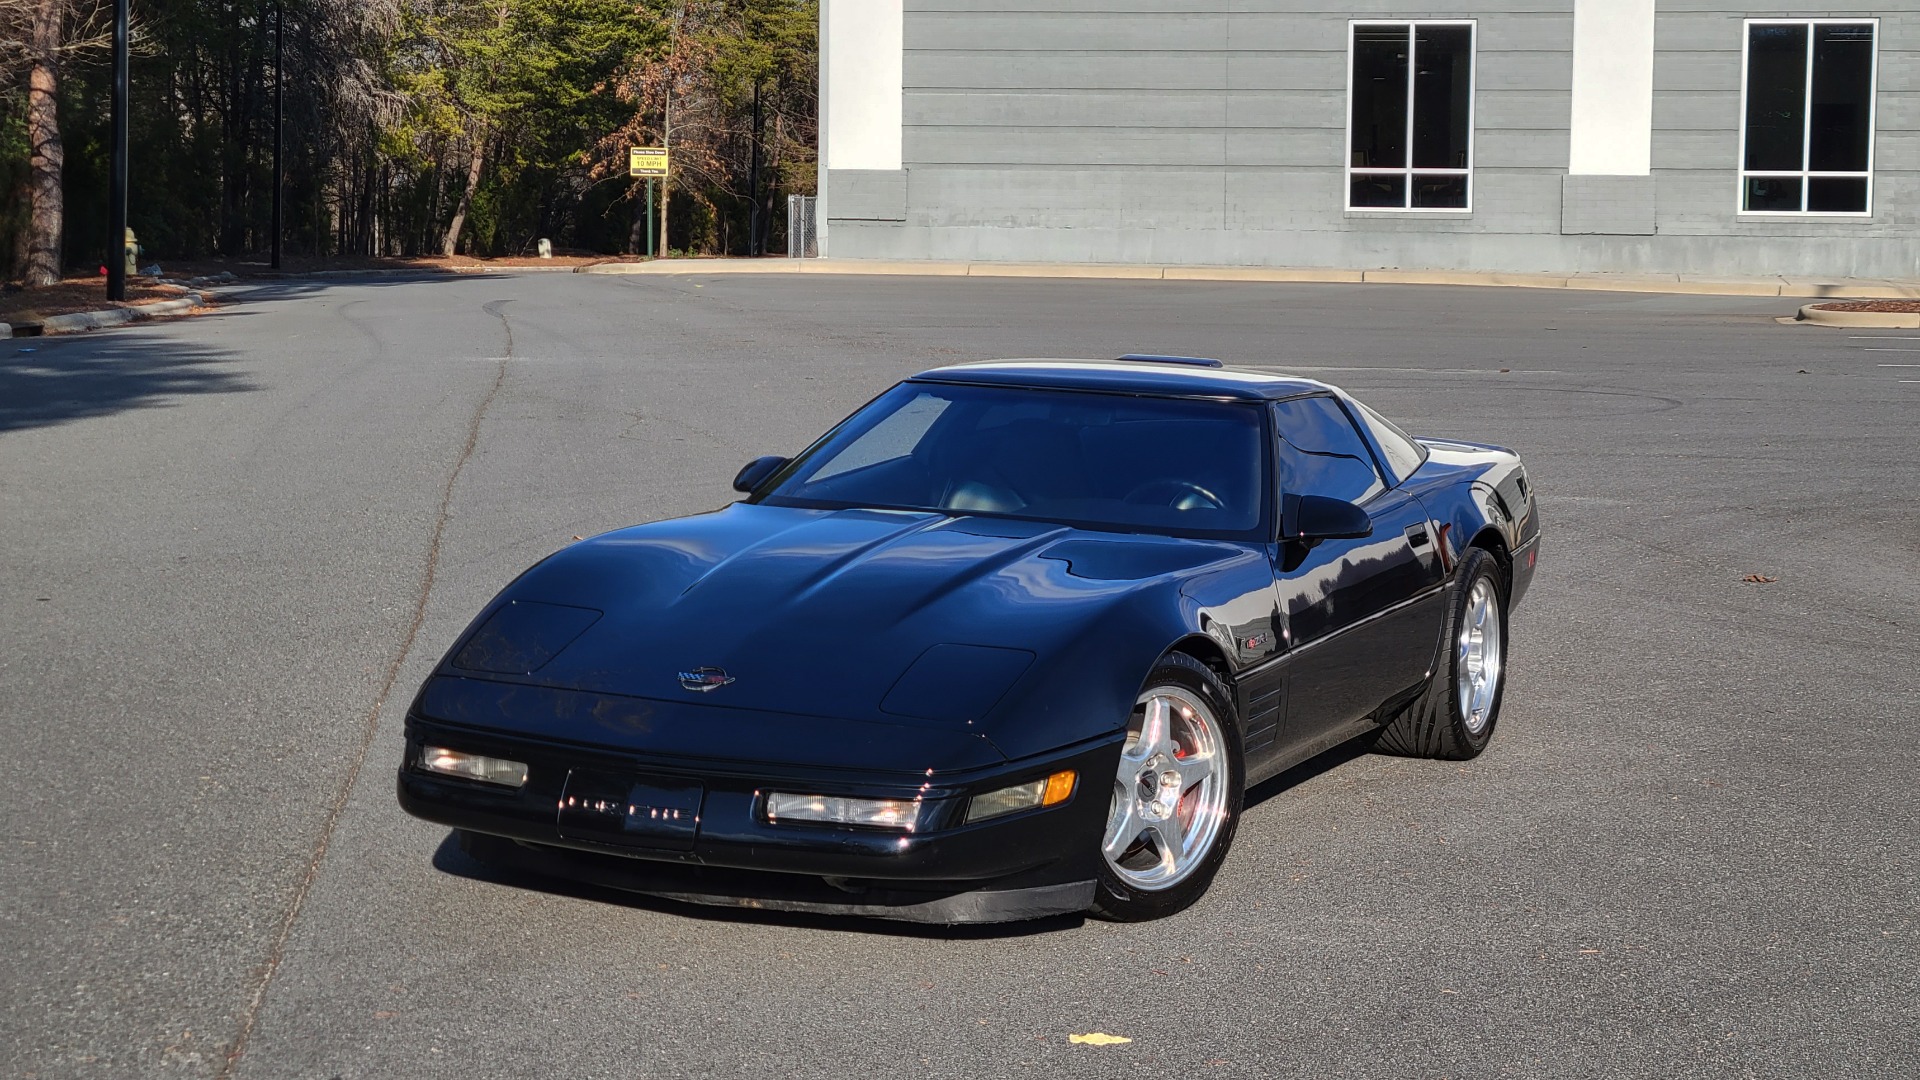 Used 1994 Chevrolet CORVETTE ZR1 COUPE (405HP+) / 6-SPEED MANUAL / 2-TOPS / LOW MILES for sale $49,995 at Formula Imports in Charlotte NC 28227 3